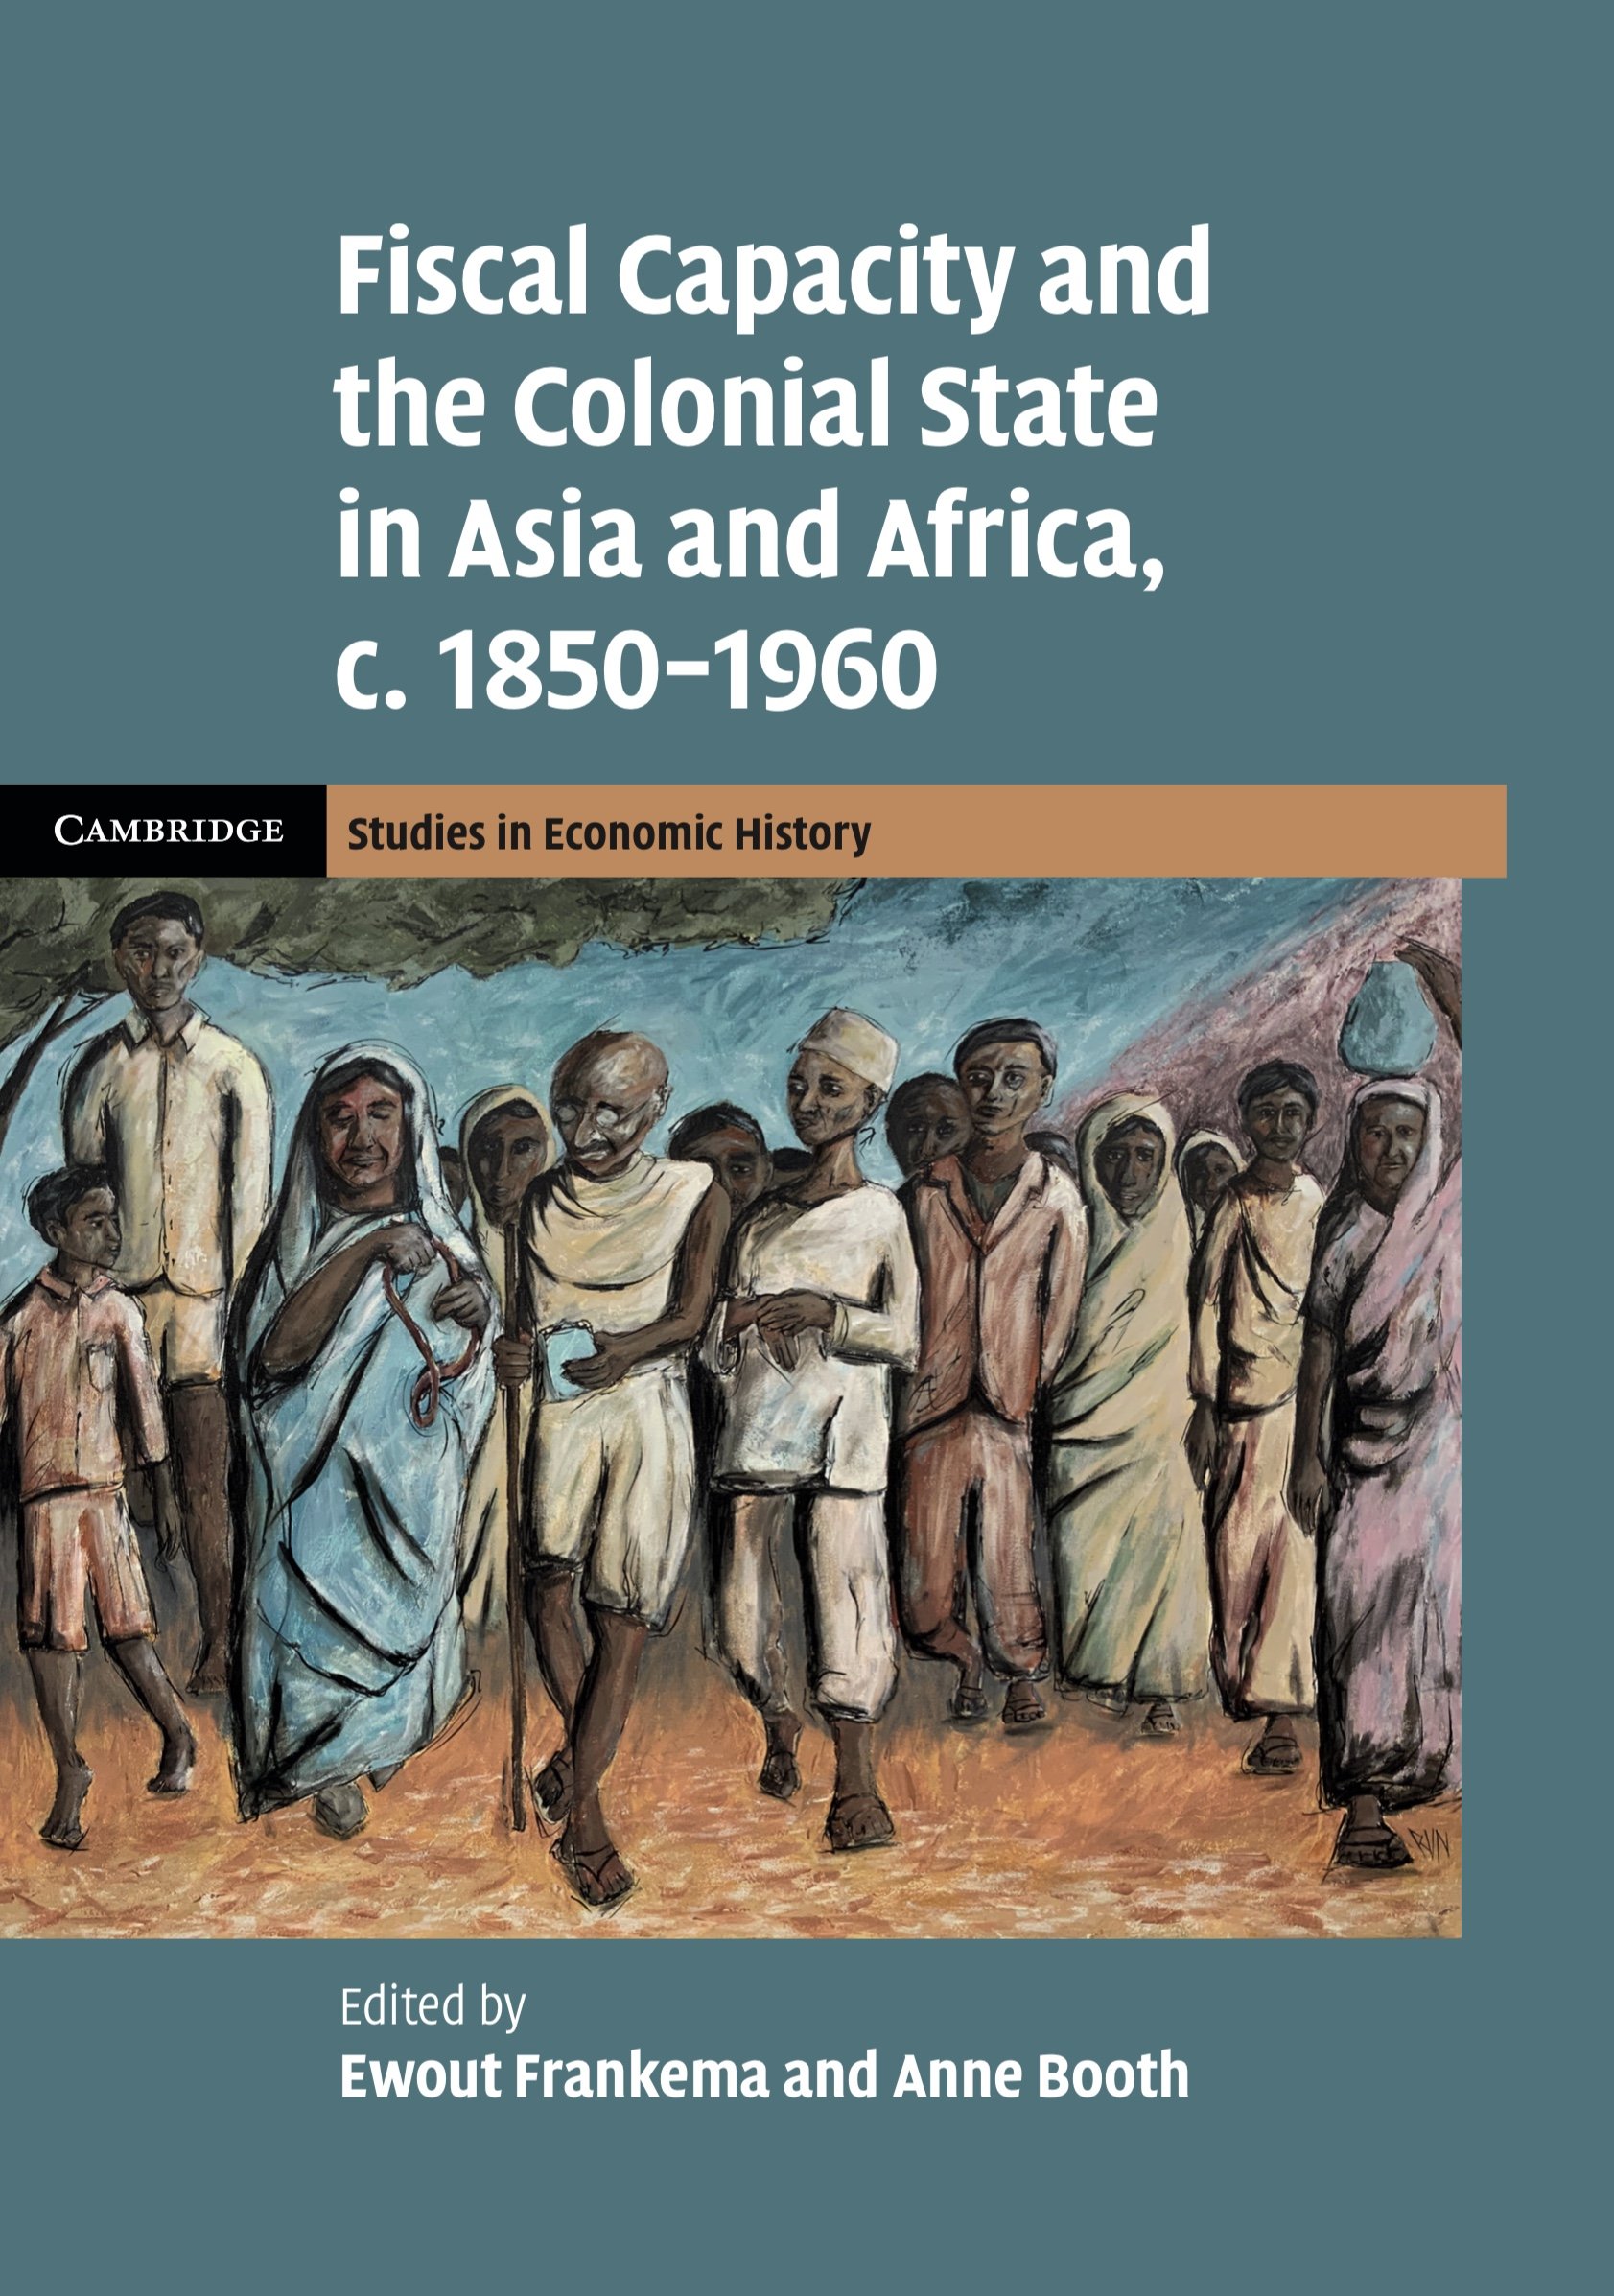 Art for Fiscal Capacity and the Colonial State in Asia and Africa